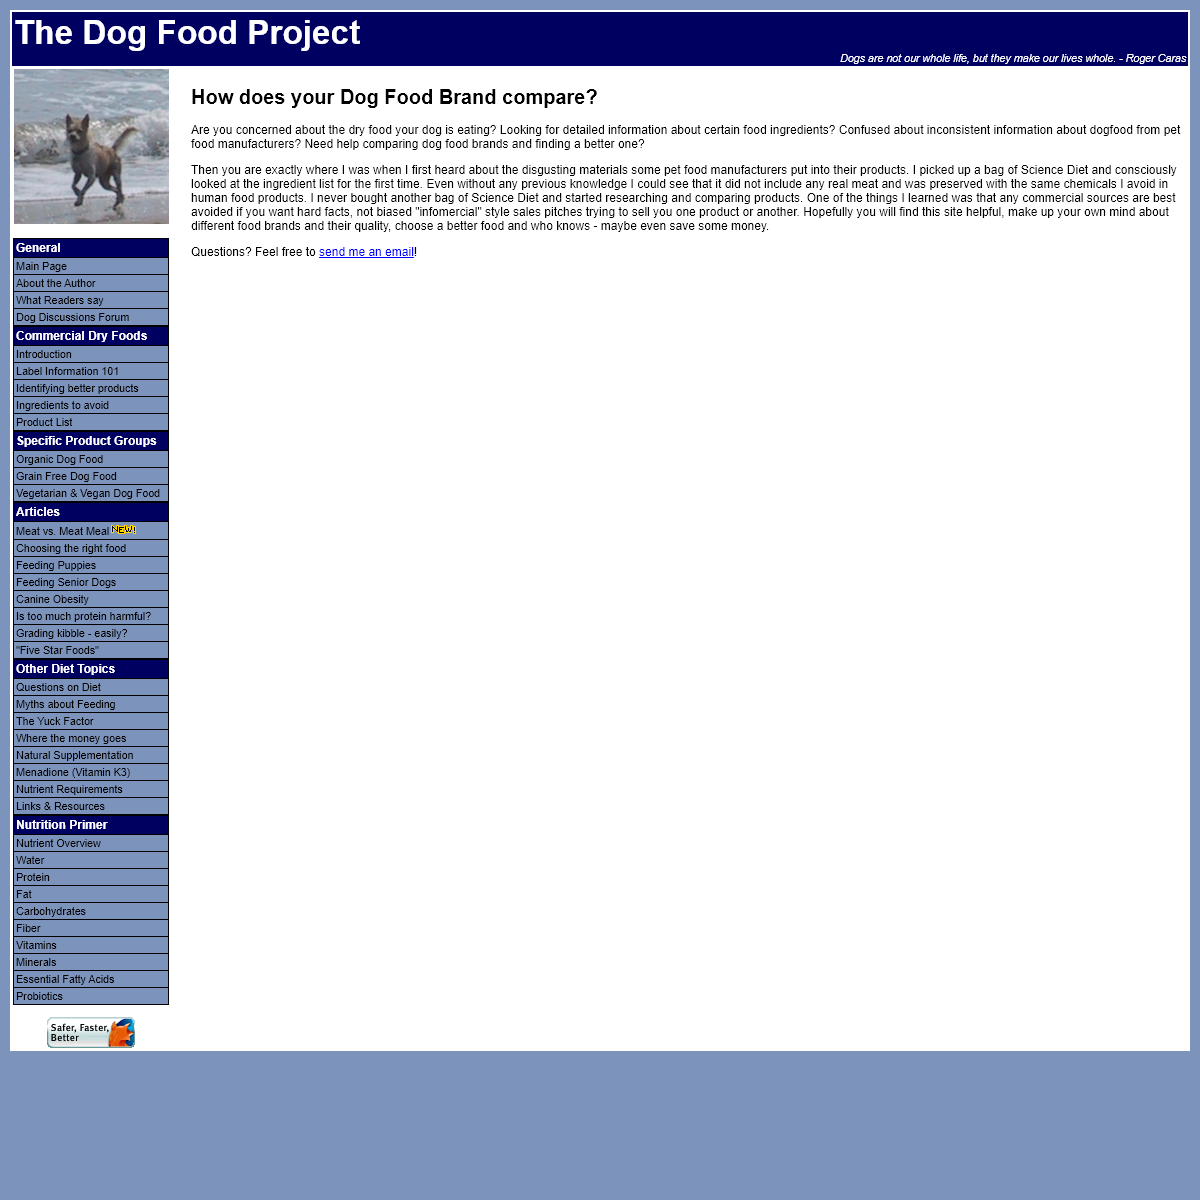 A complete backup of dogfoodproject.com